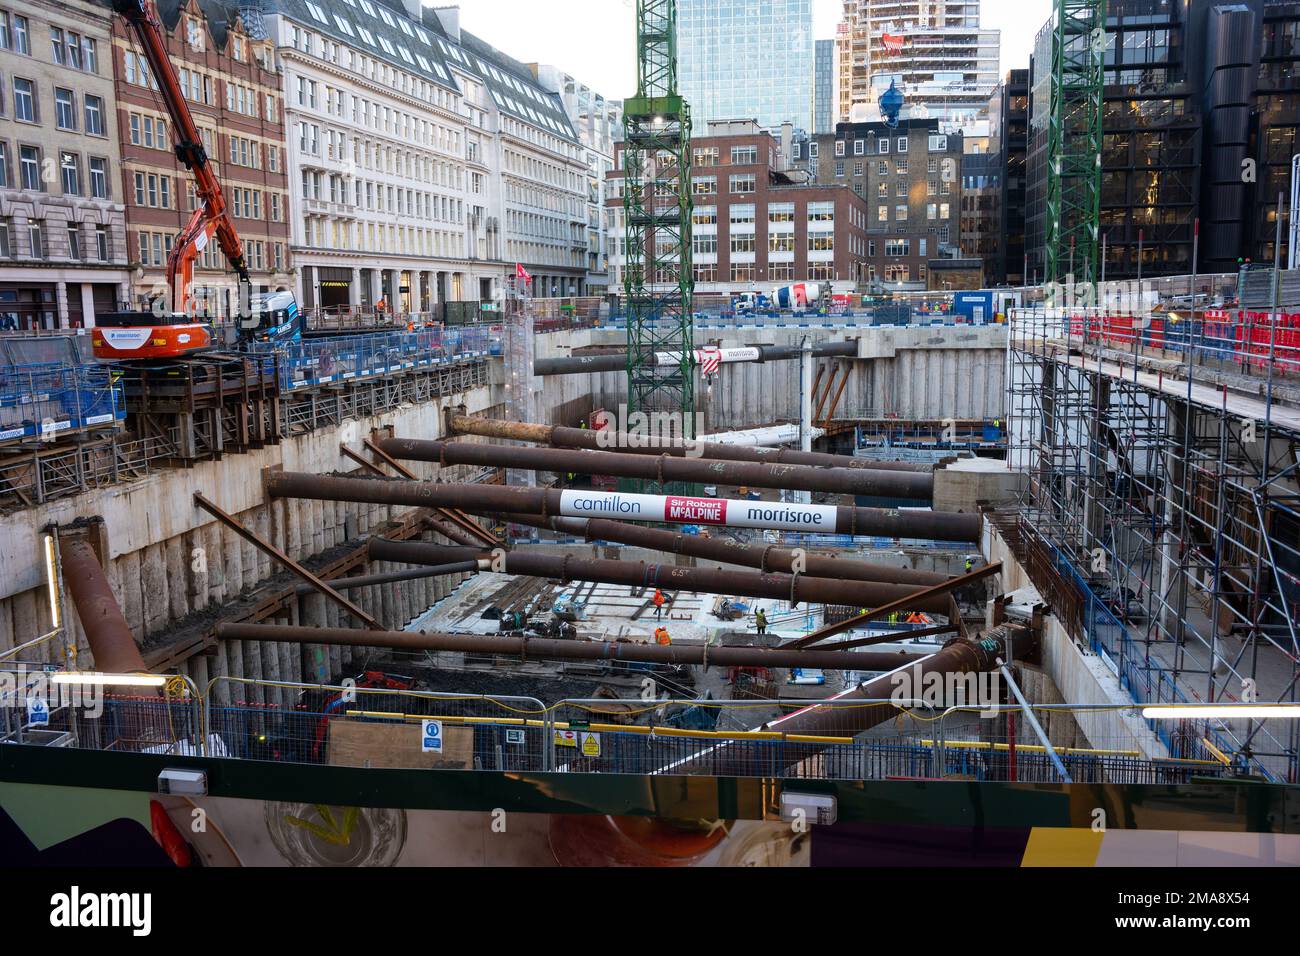 Construction work at Broadgate in London Stock Photo